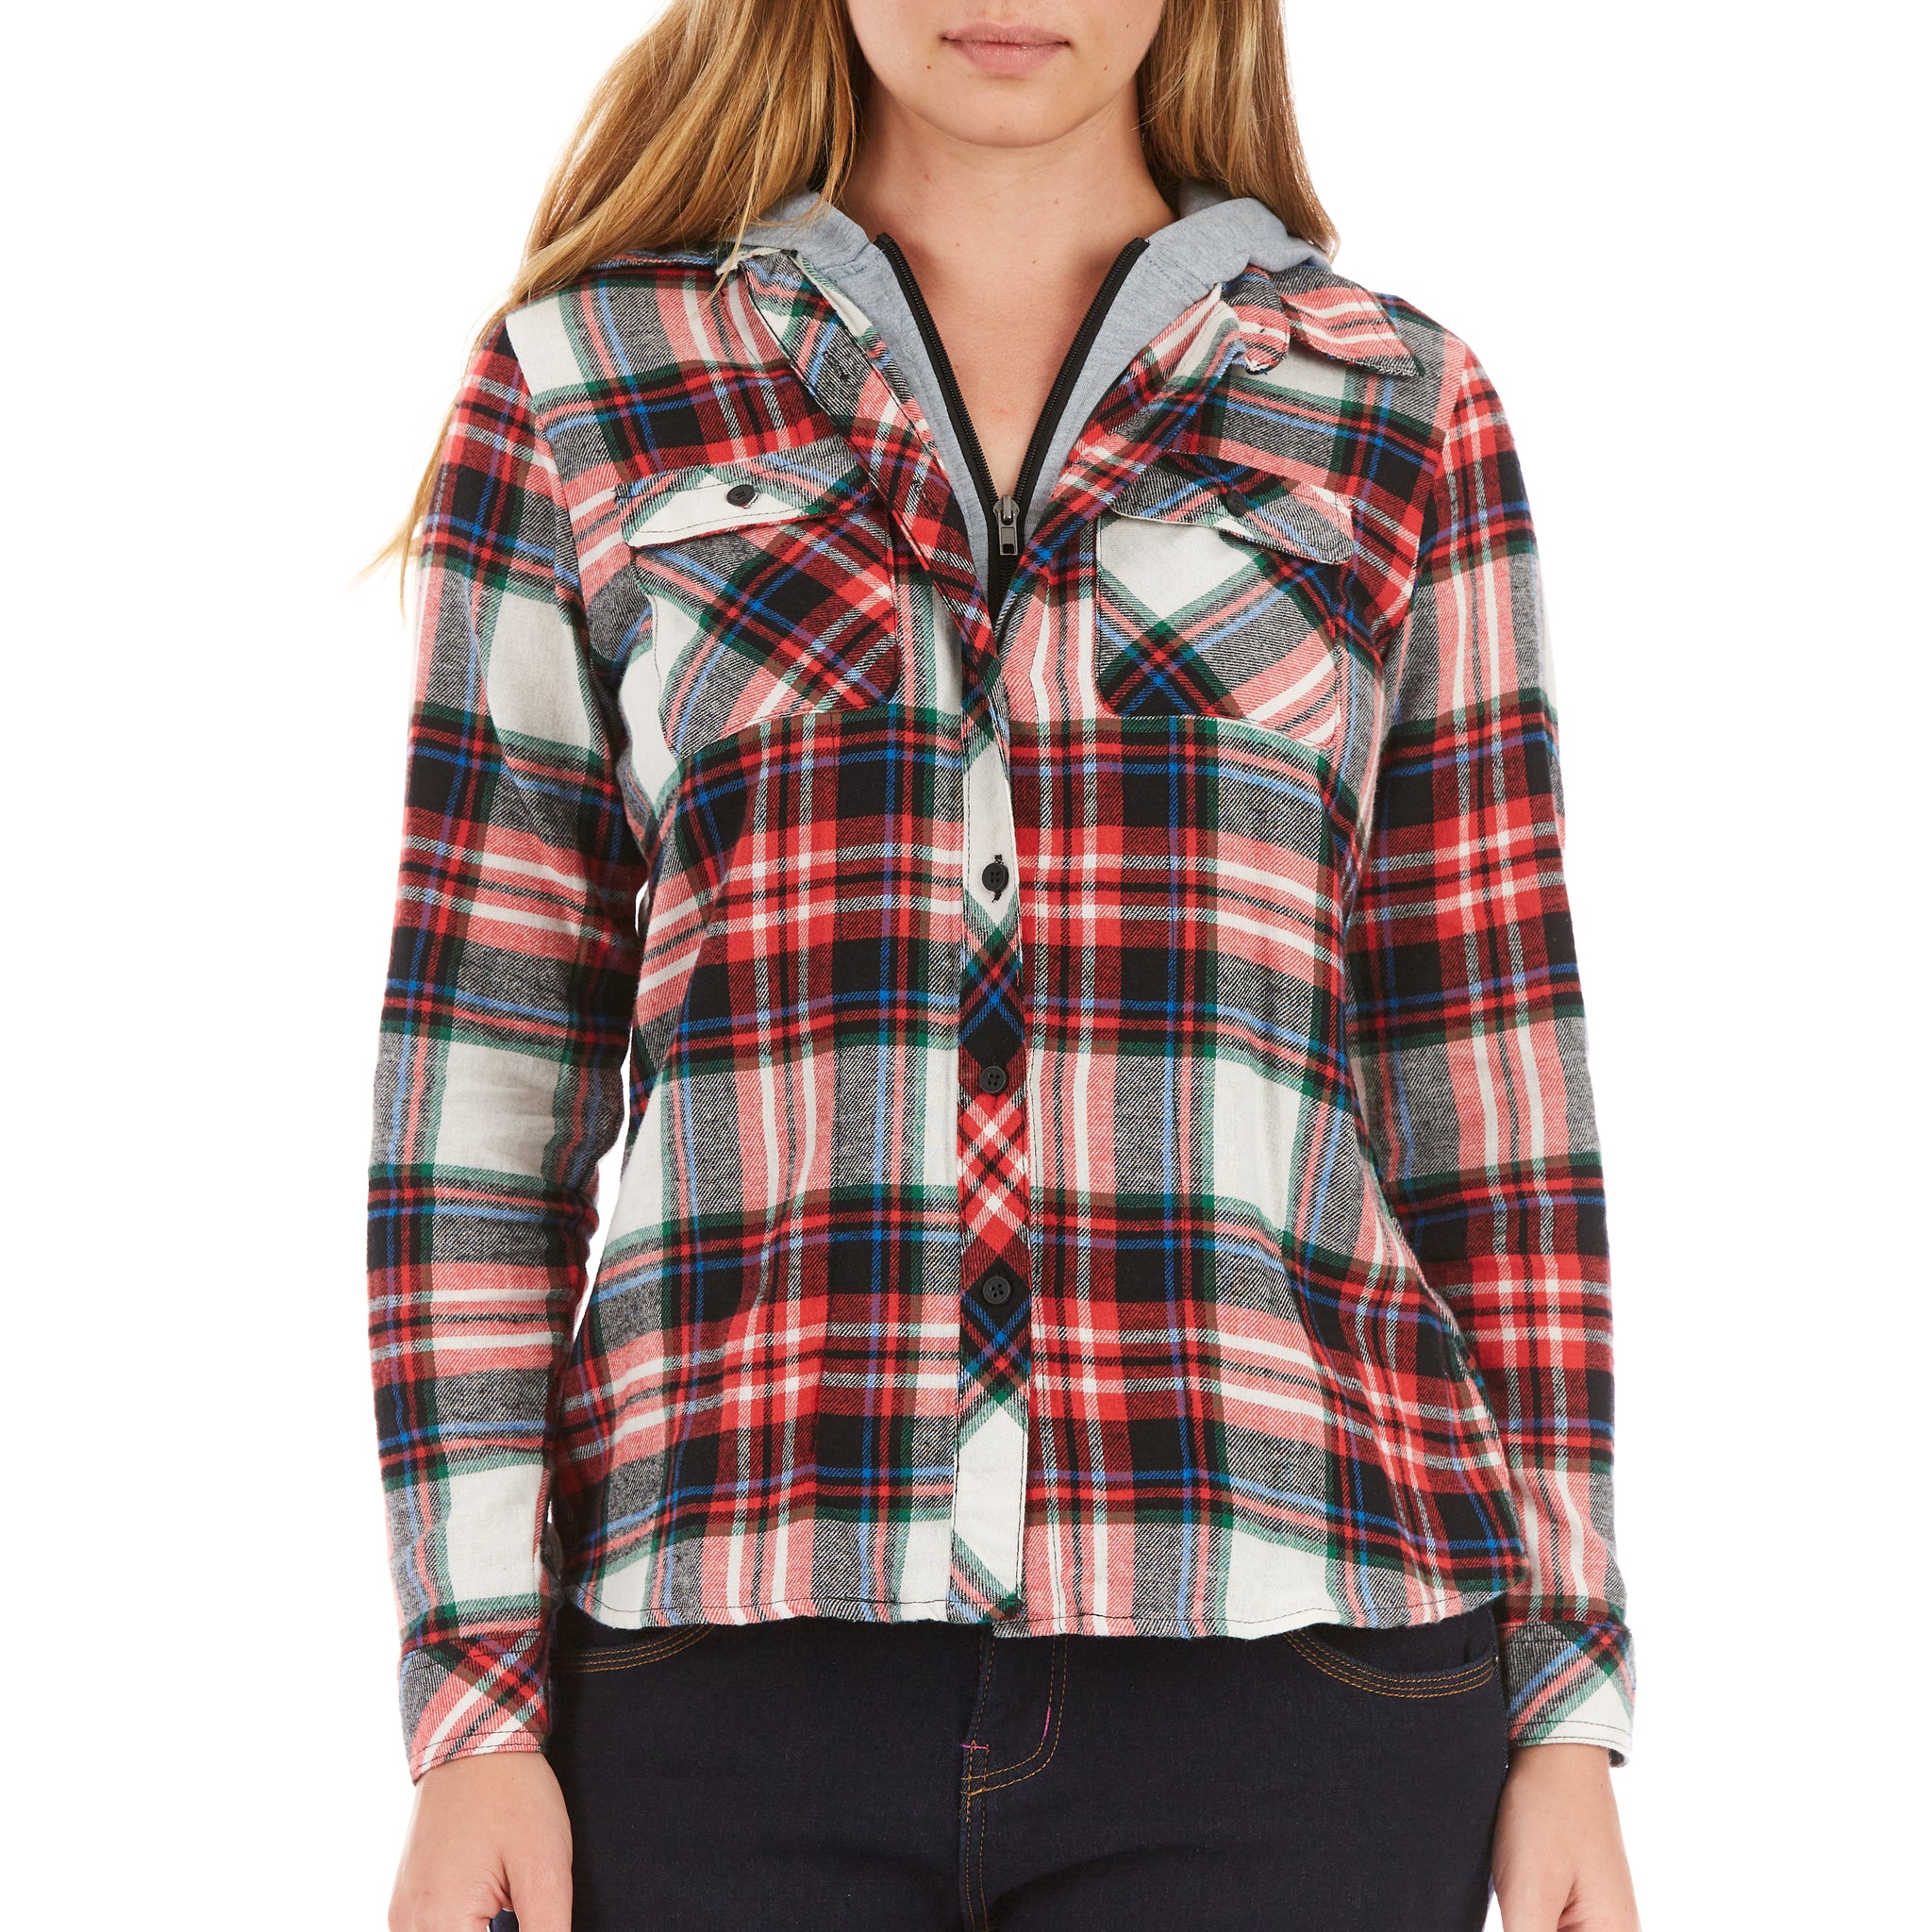 HOODED LONG SLEEVE FLANNEL PLAID SHIRT WITH ZIP HOOD INSET AND TWO FLAP POCKETS